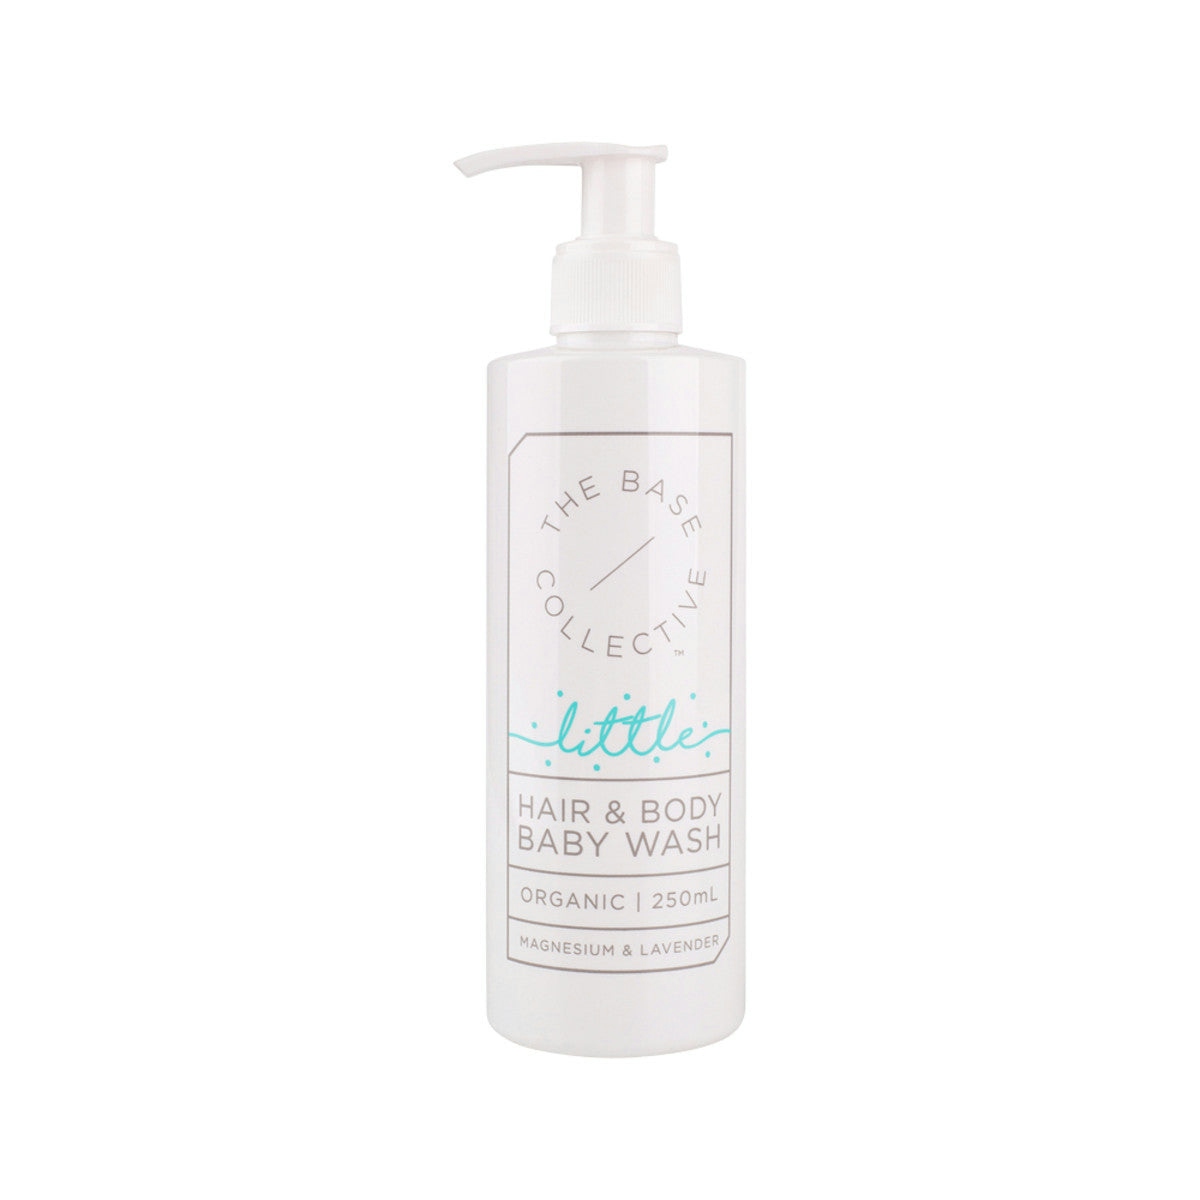 image of The Base Collective Little Organic Hair & Body Wash Magnesium & Lavender 250ml on white background 